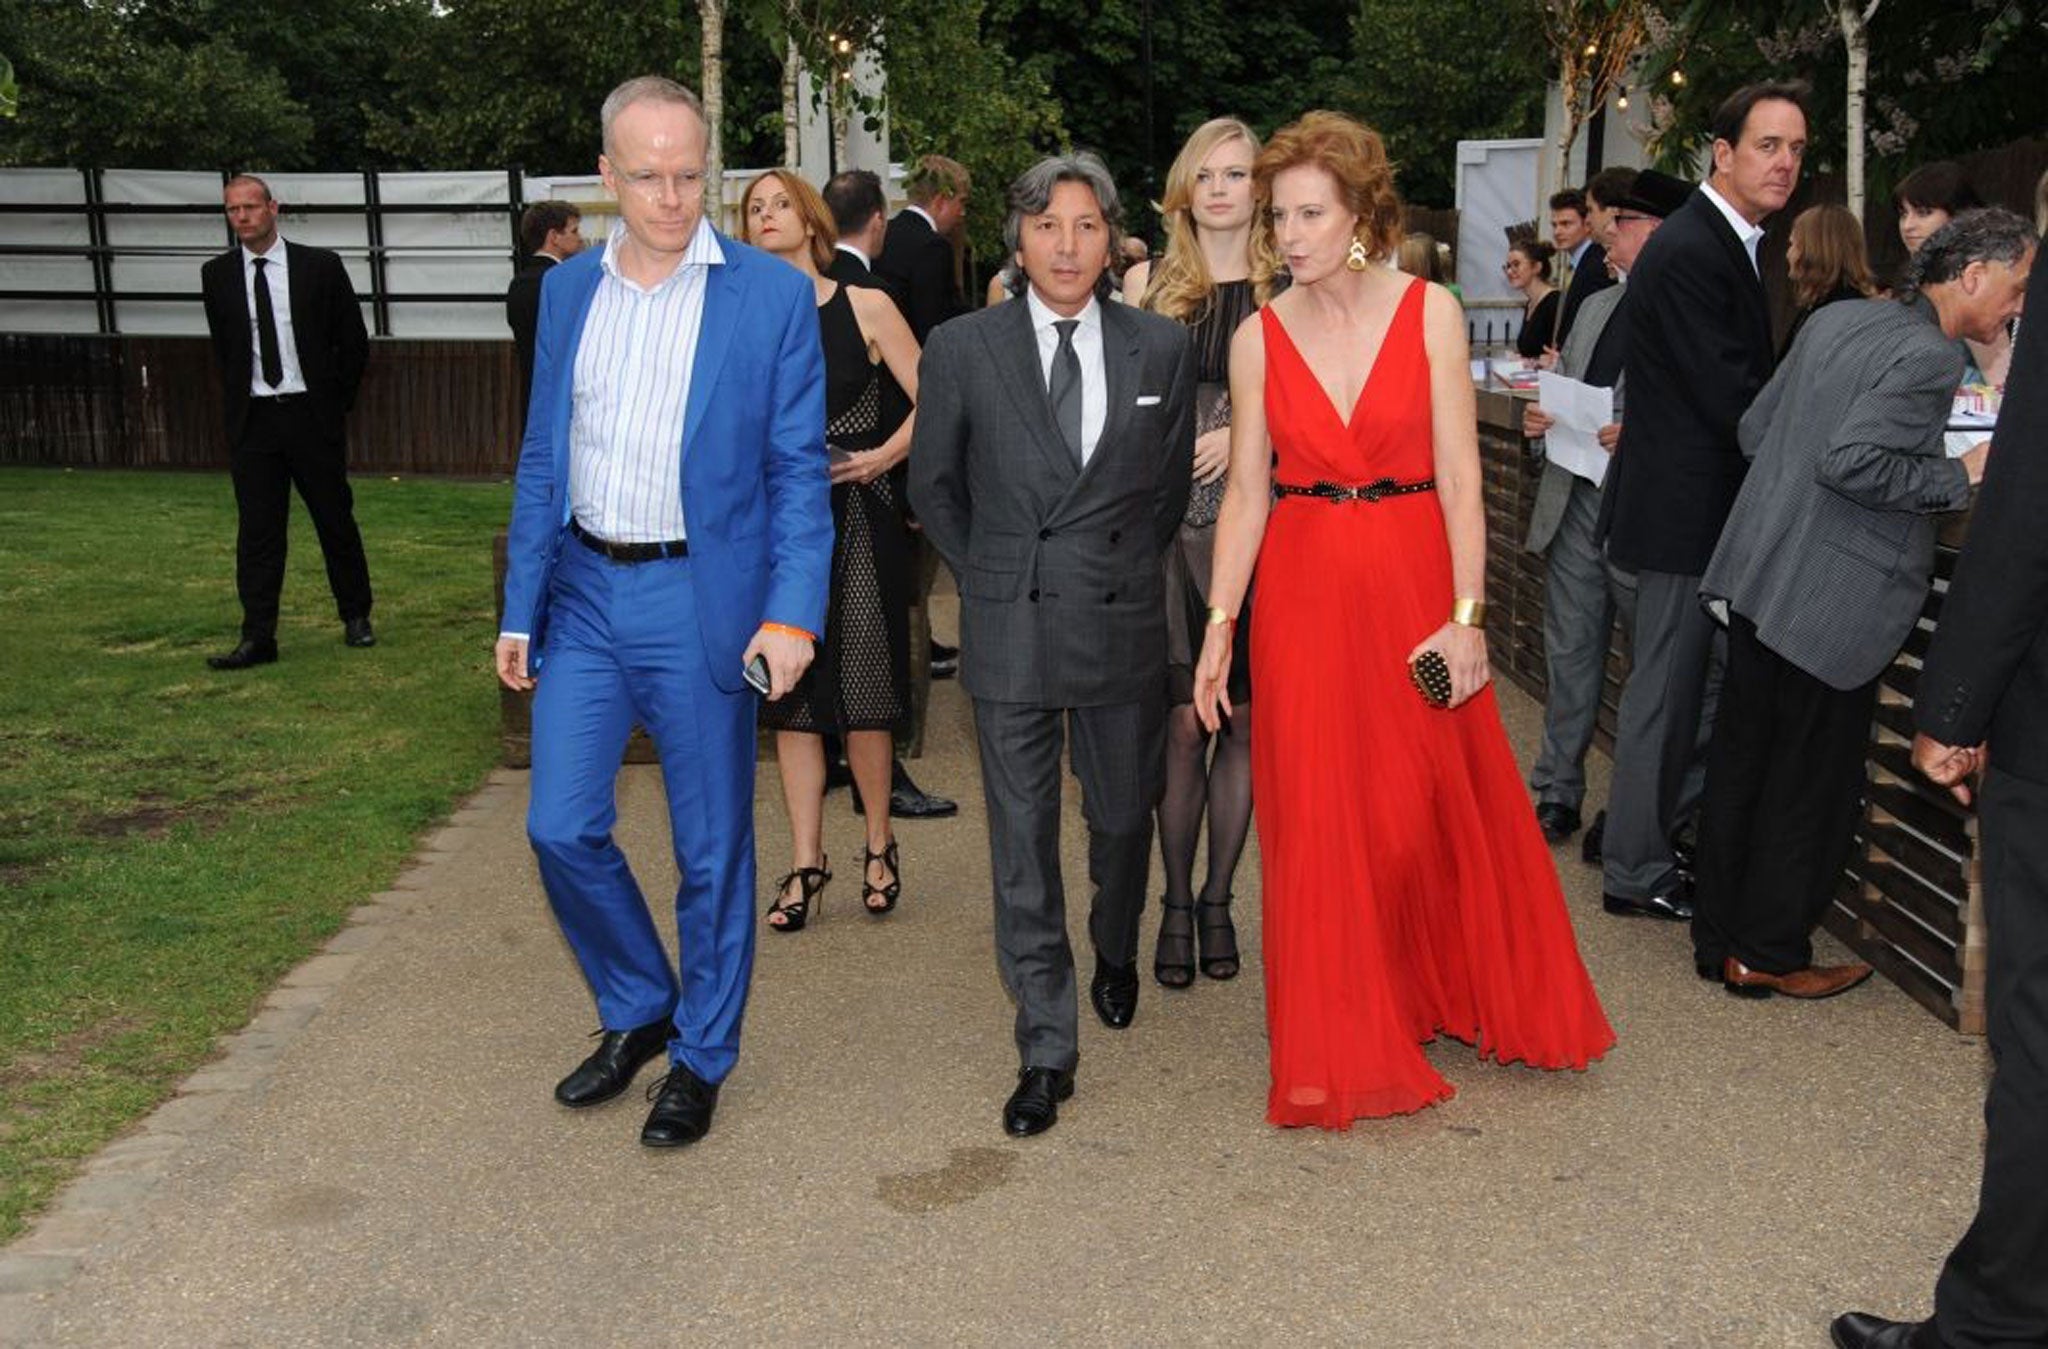 Snake charmer: Hans-Ulrich Obrist, Leon Max and Julia Peyton-Jones, at the Serpentine Summer Party in London's Hyde Park, June 2012